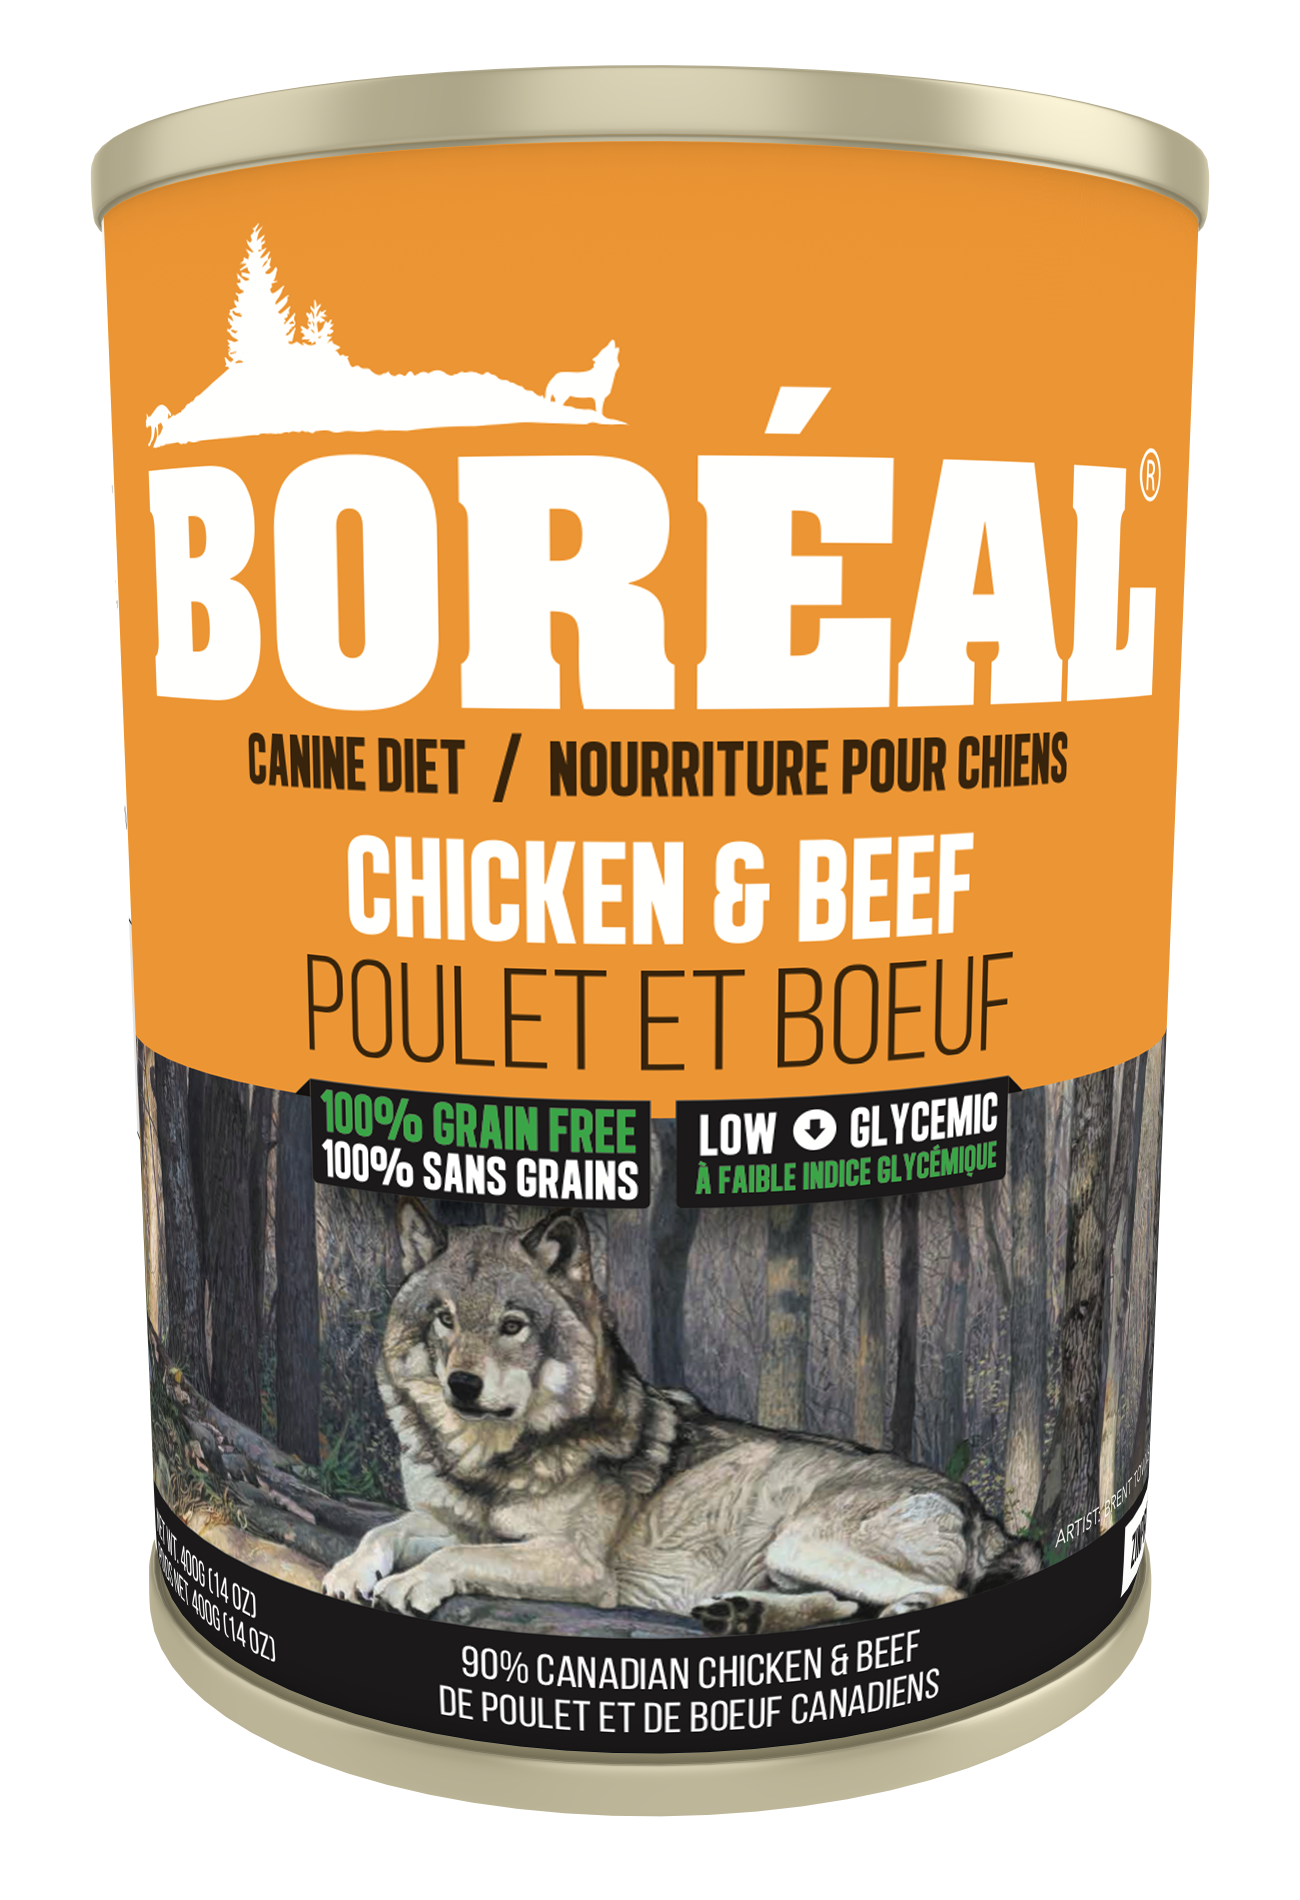 Boréal Functional Canned Dog Food, Grain-Free, Big Bear Chicken & Beef LP